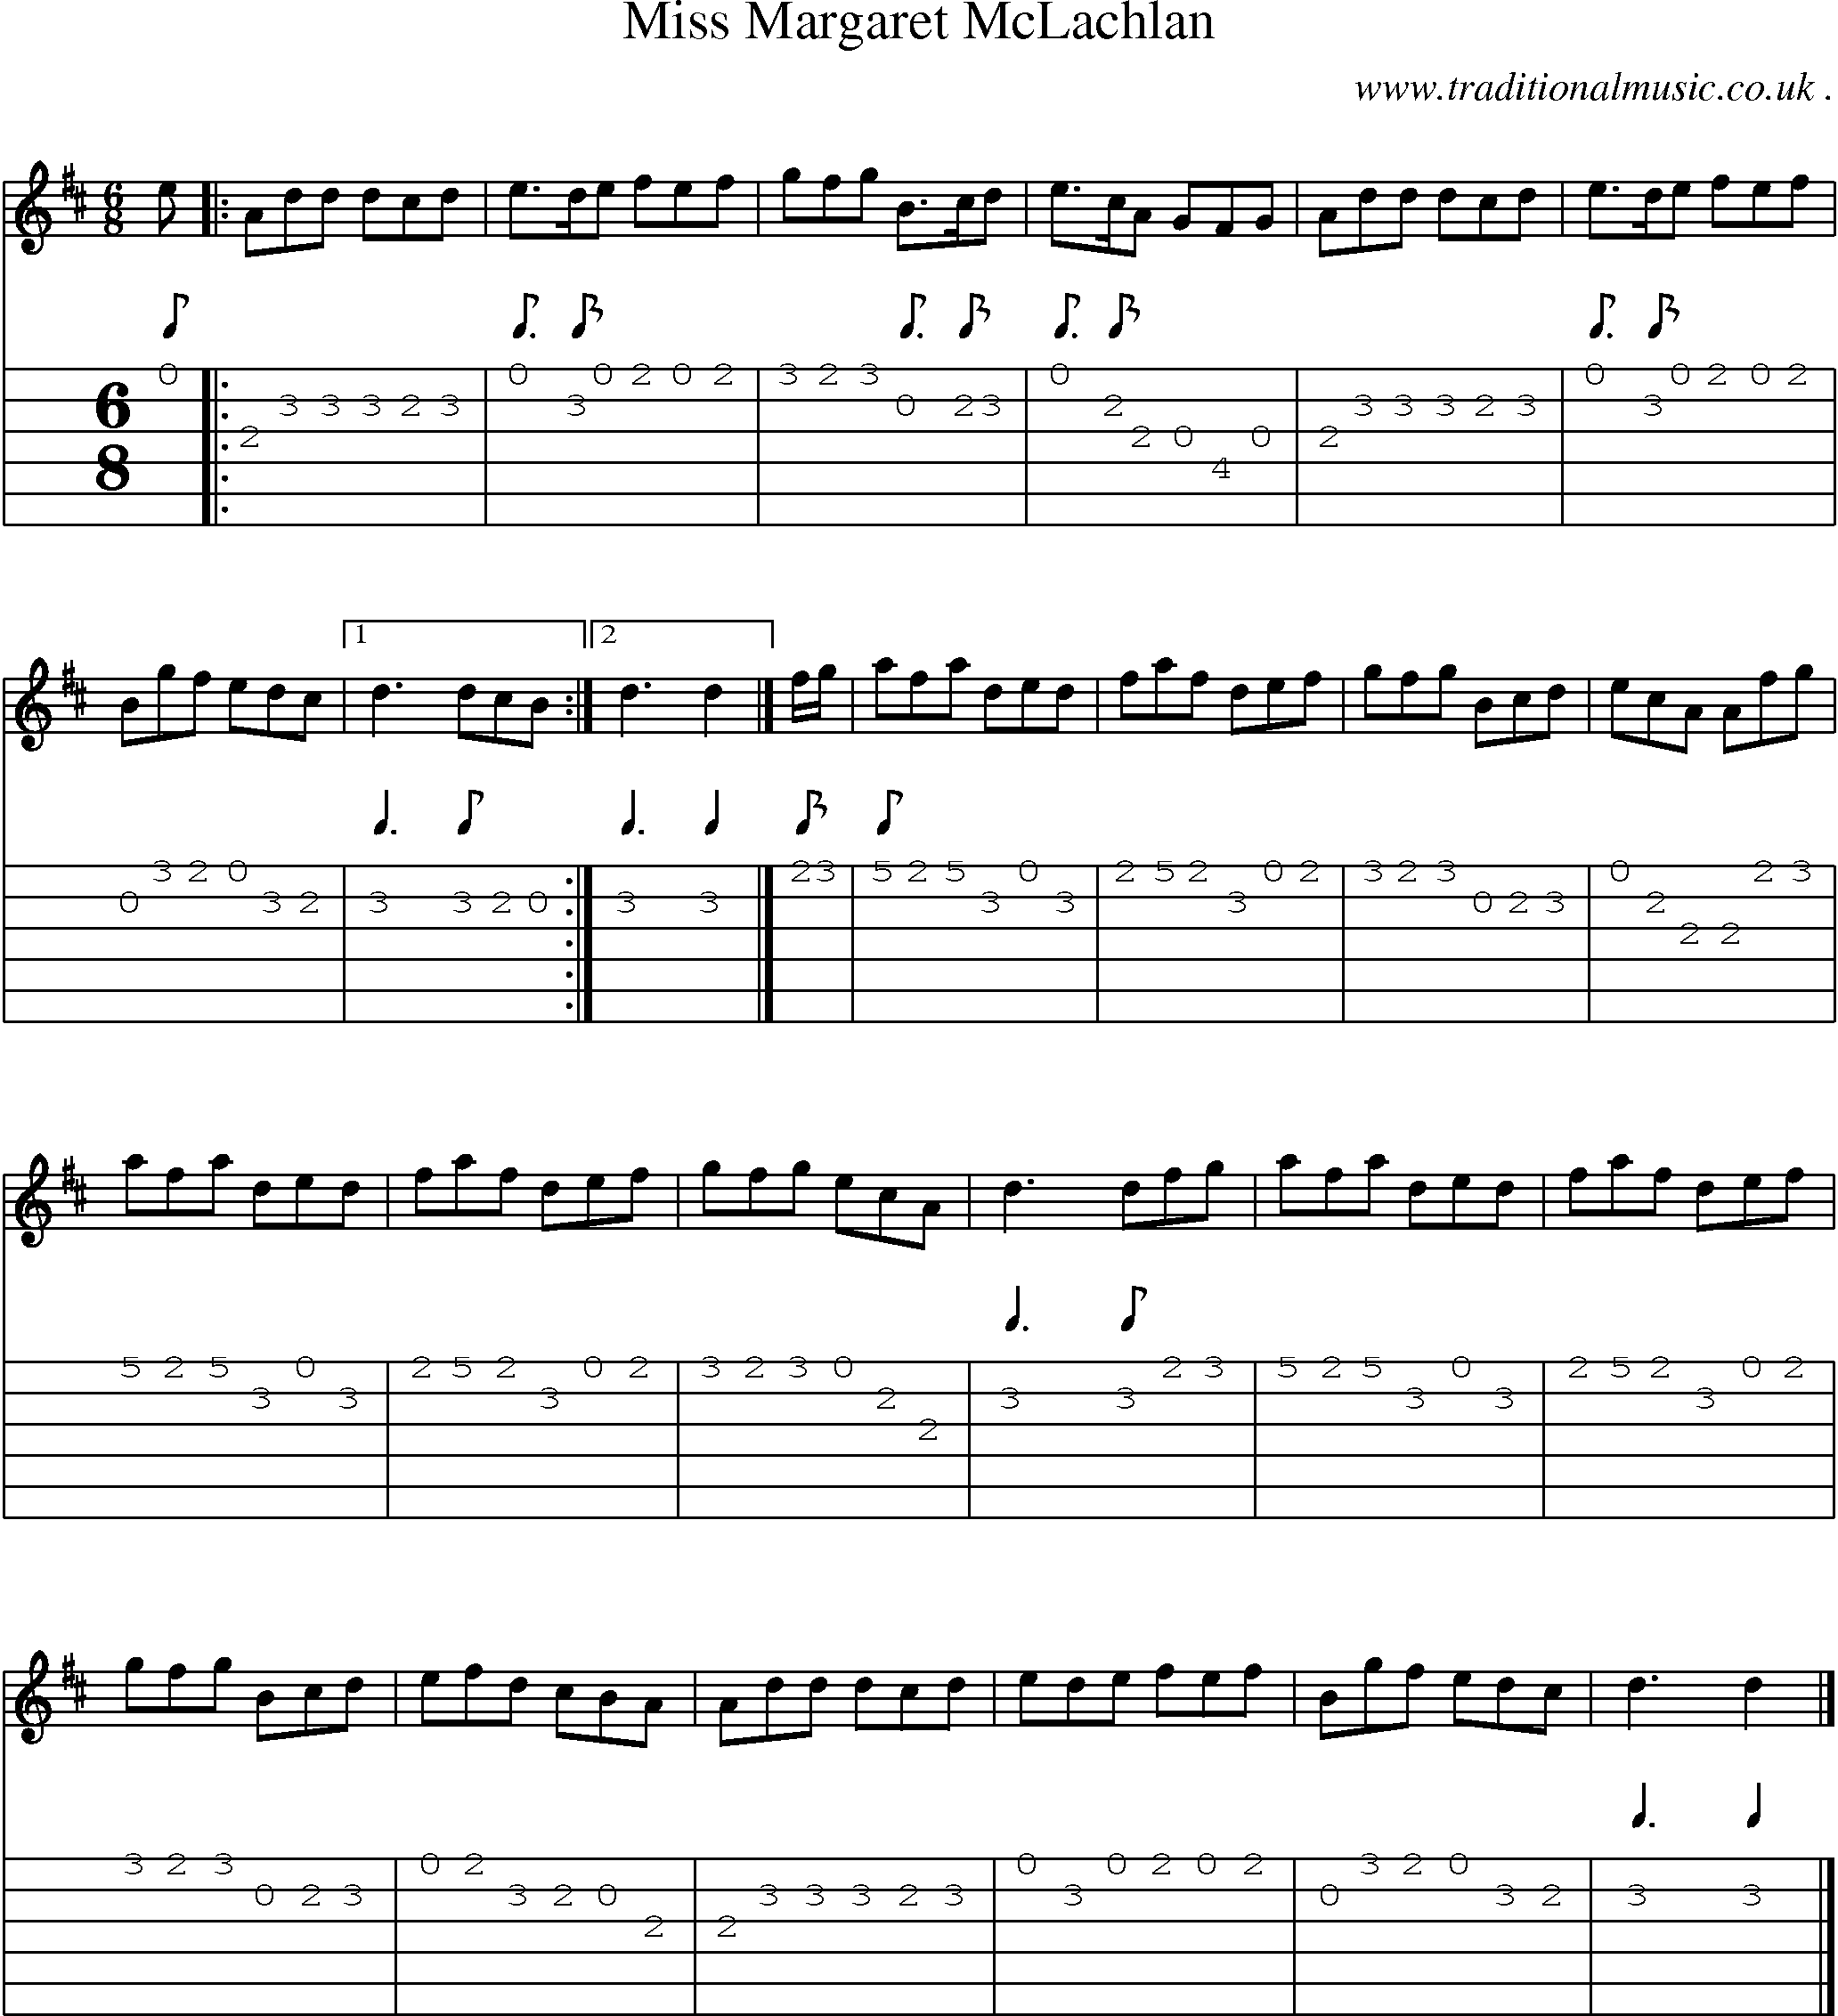 Sheet-music  score, Chords and Guitar Tabs for Miss Margaret Mclachlan